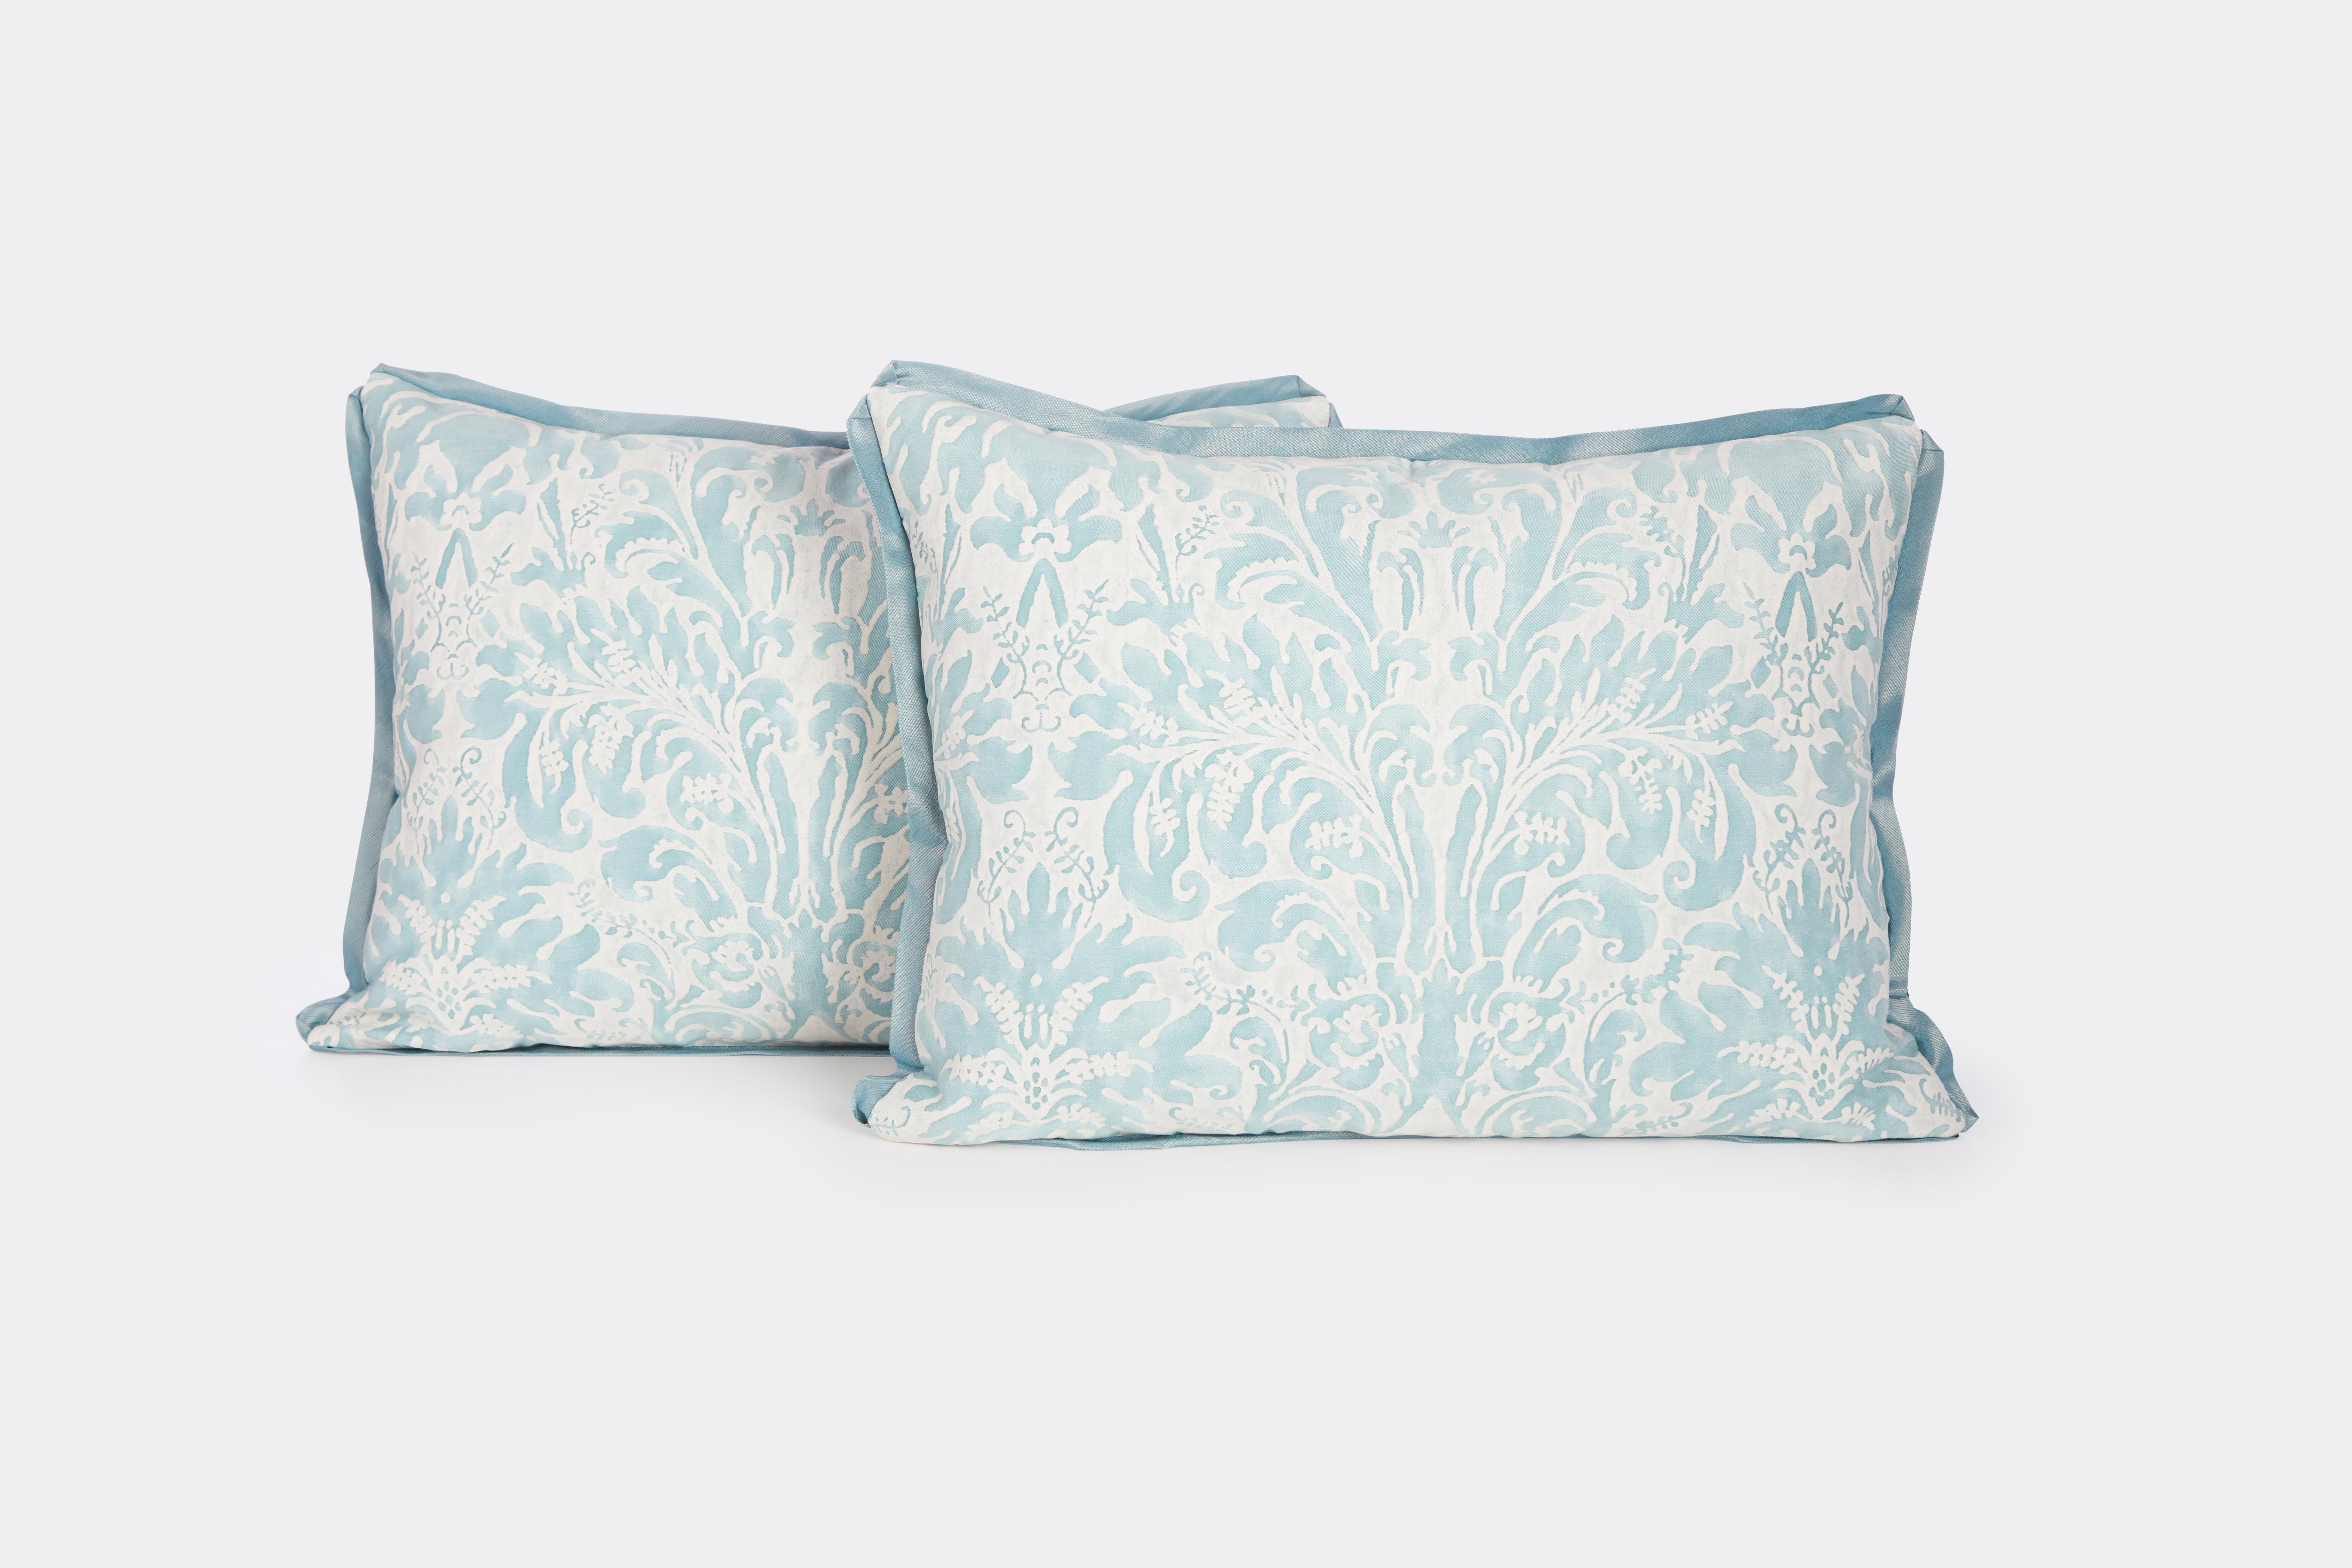 A pair of Fortuny Sevigne cushions in French blue and antique white with blue bias silk edging and white self striped backs. Made by David Duncan Studio in New York City.